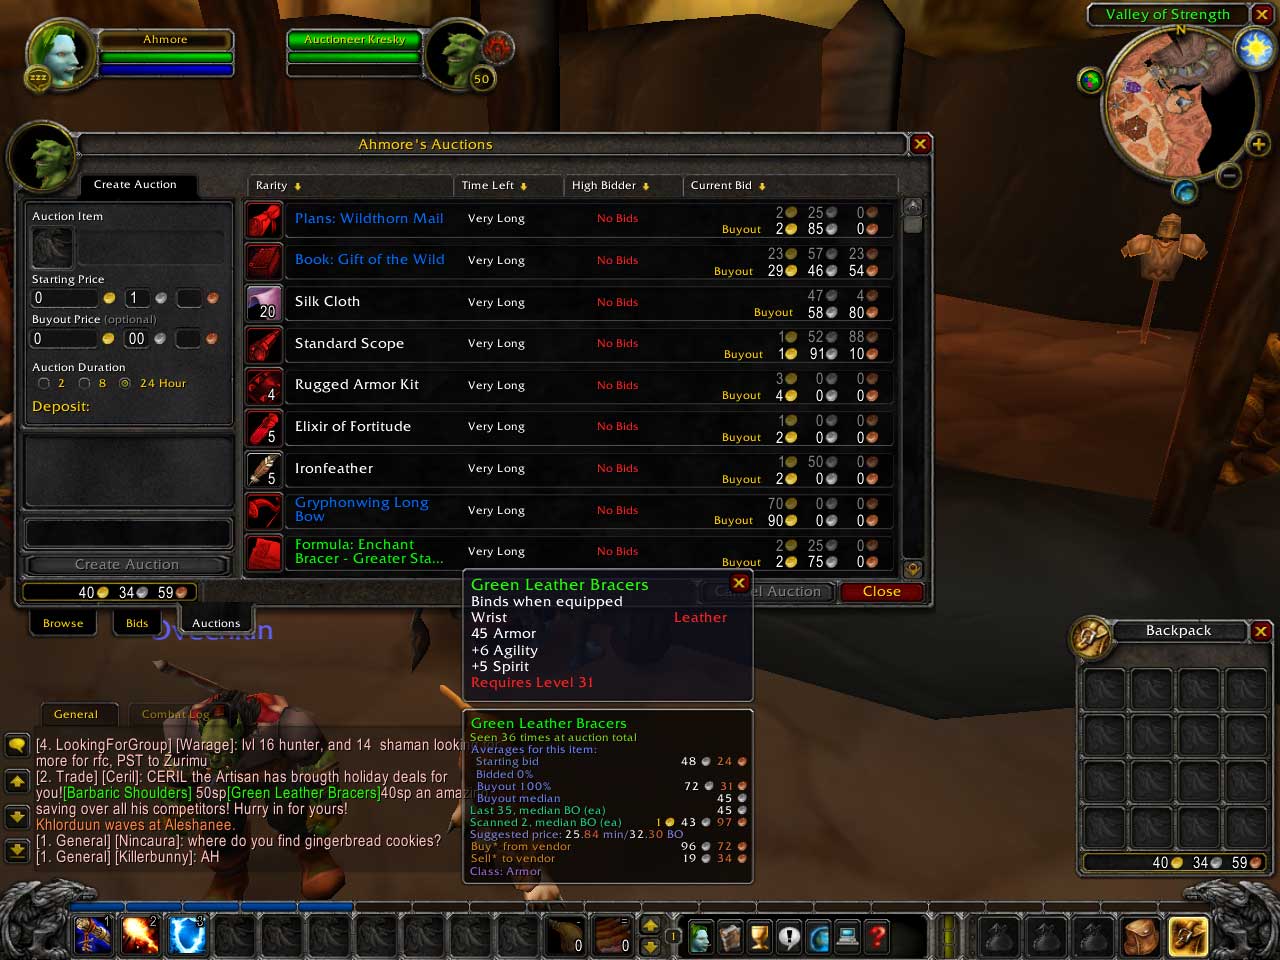 Autonomi stole Gods How to Make Gold on Burning Crusade WoW Private Servers - DKPminus